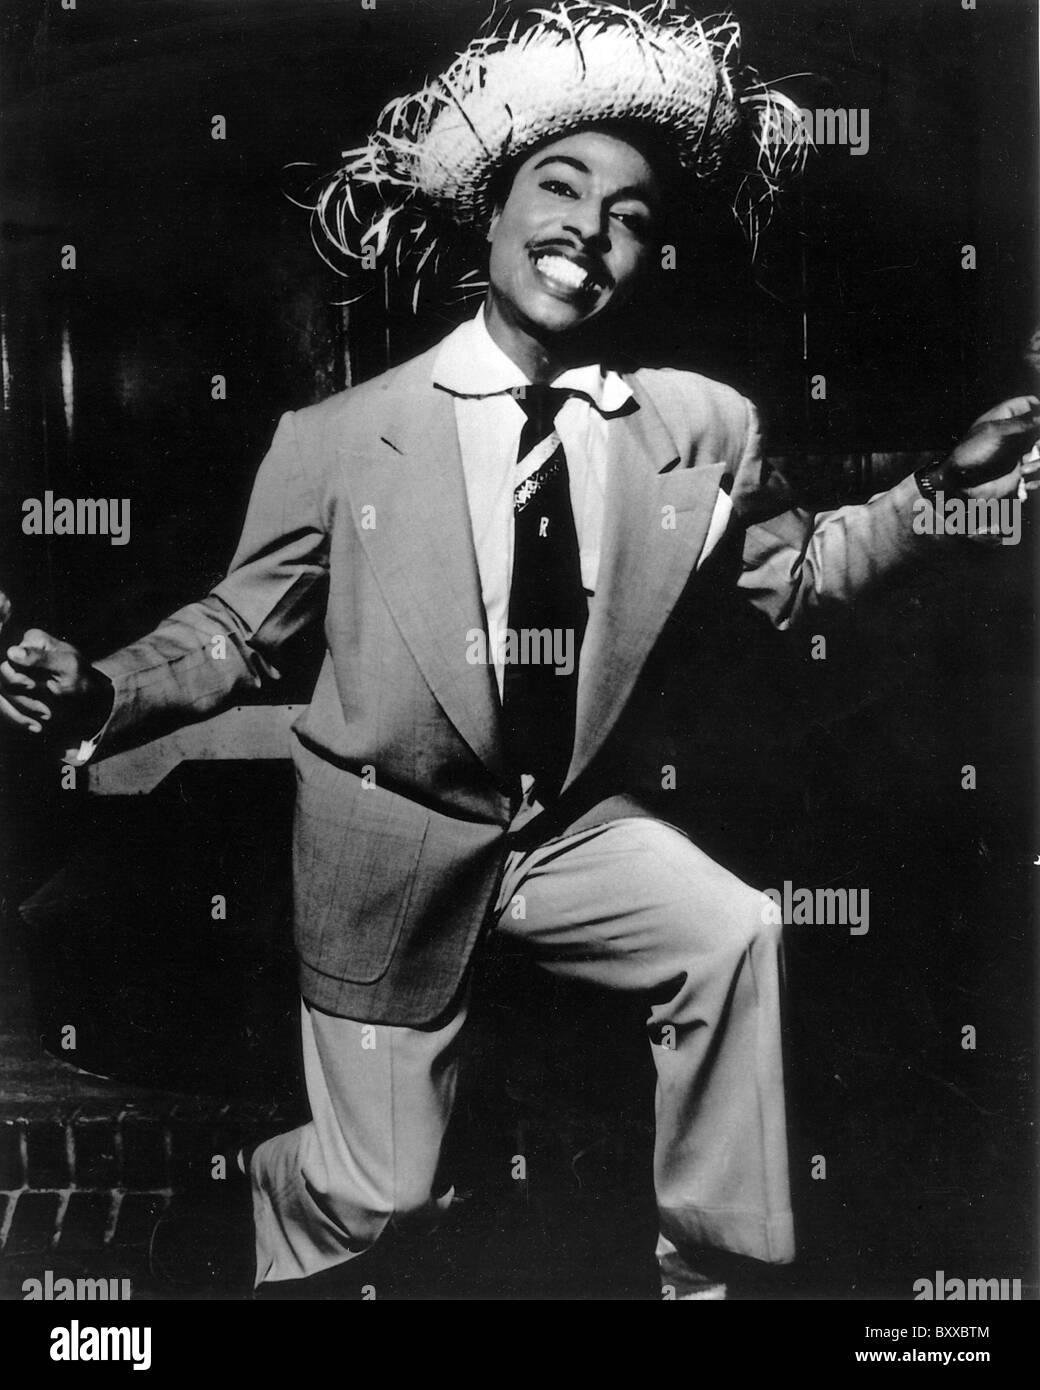 Little richard Black and White Stock Photos & Images - Alamy